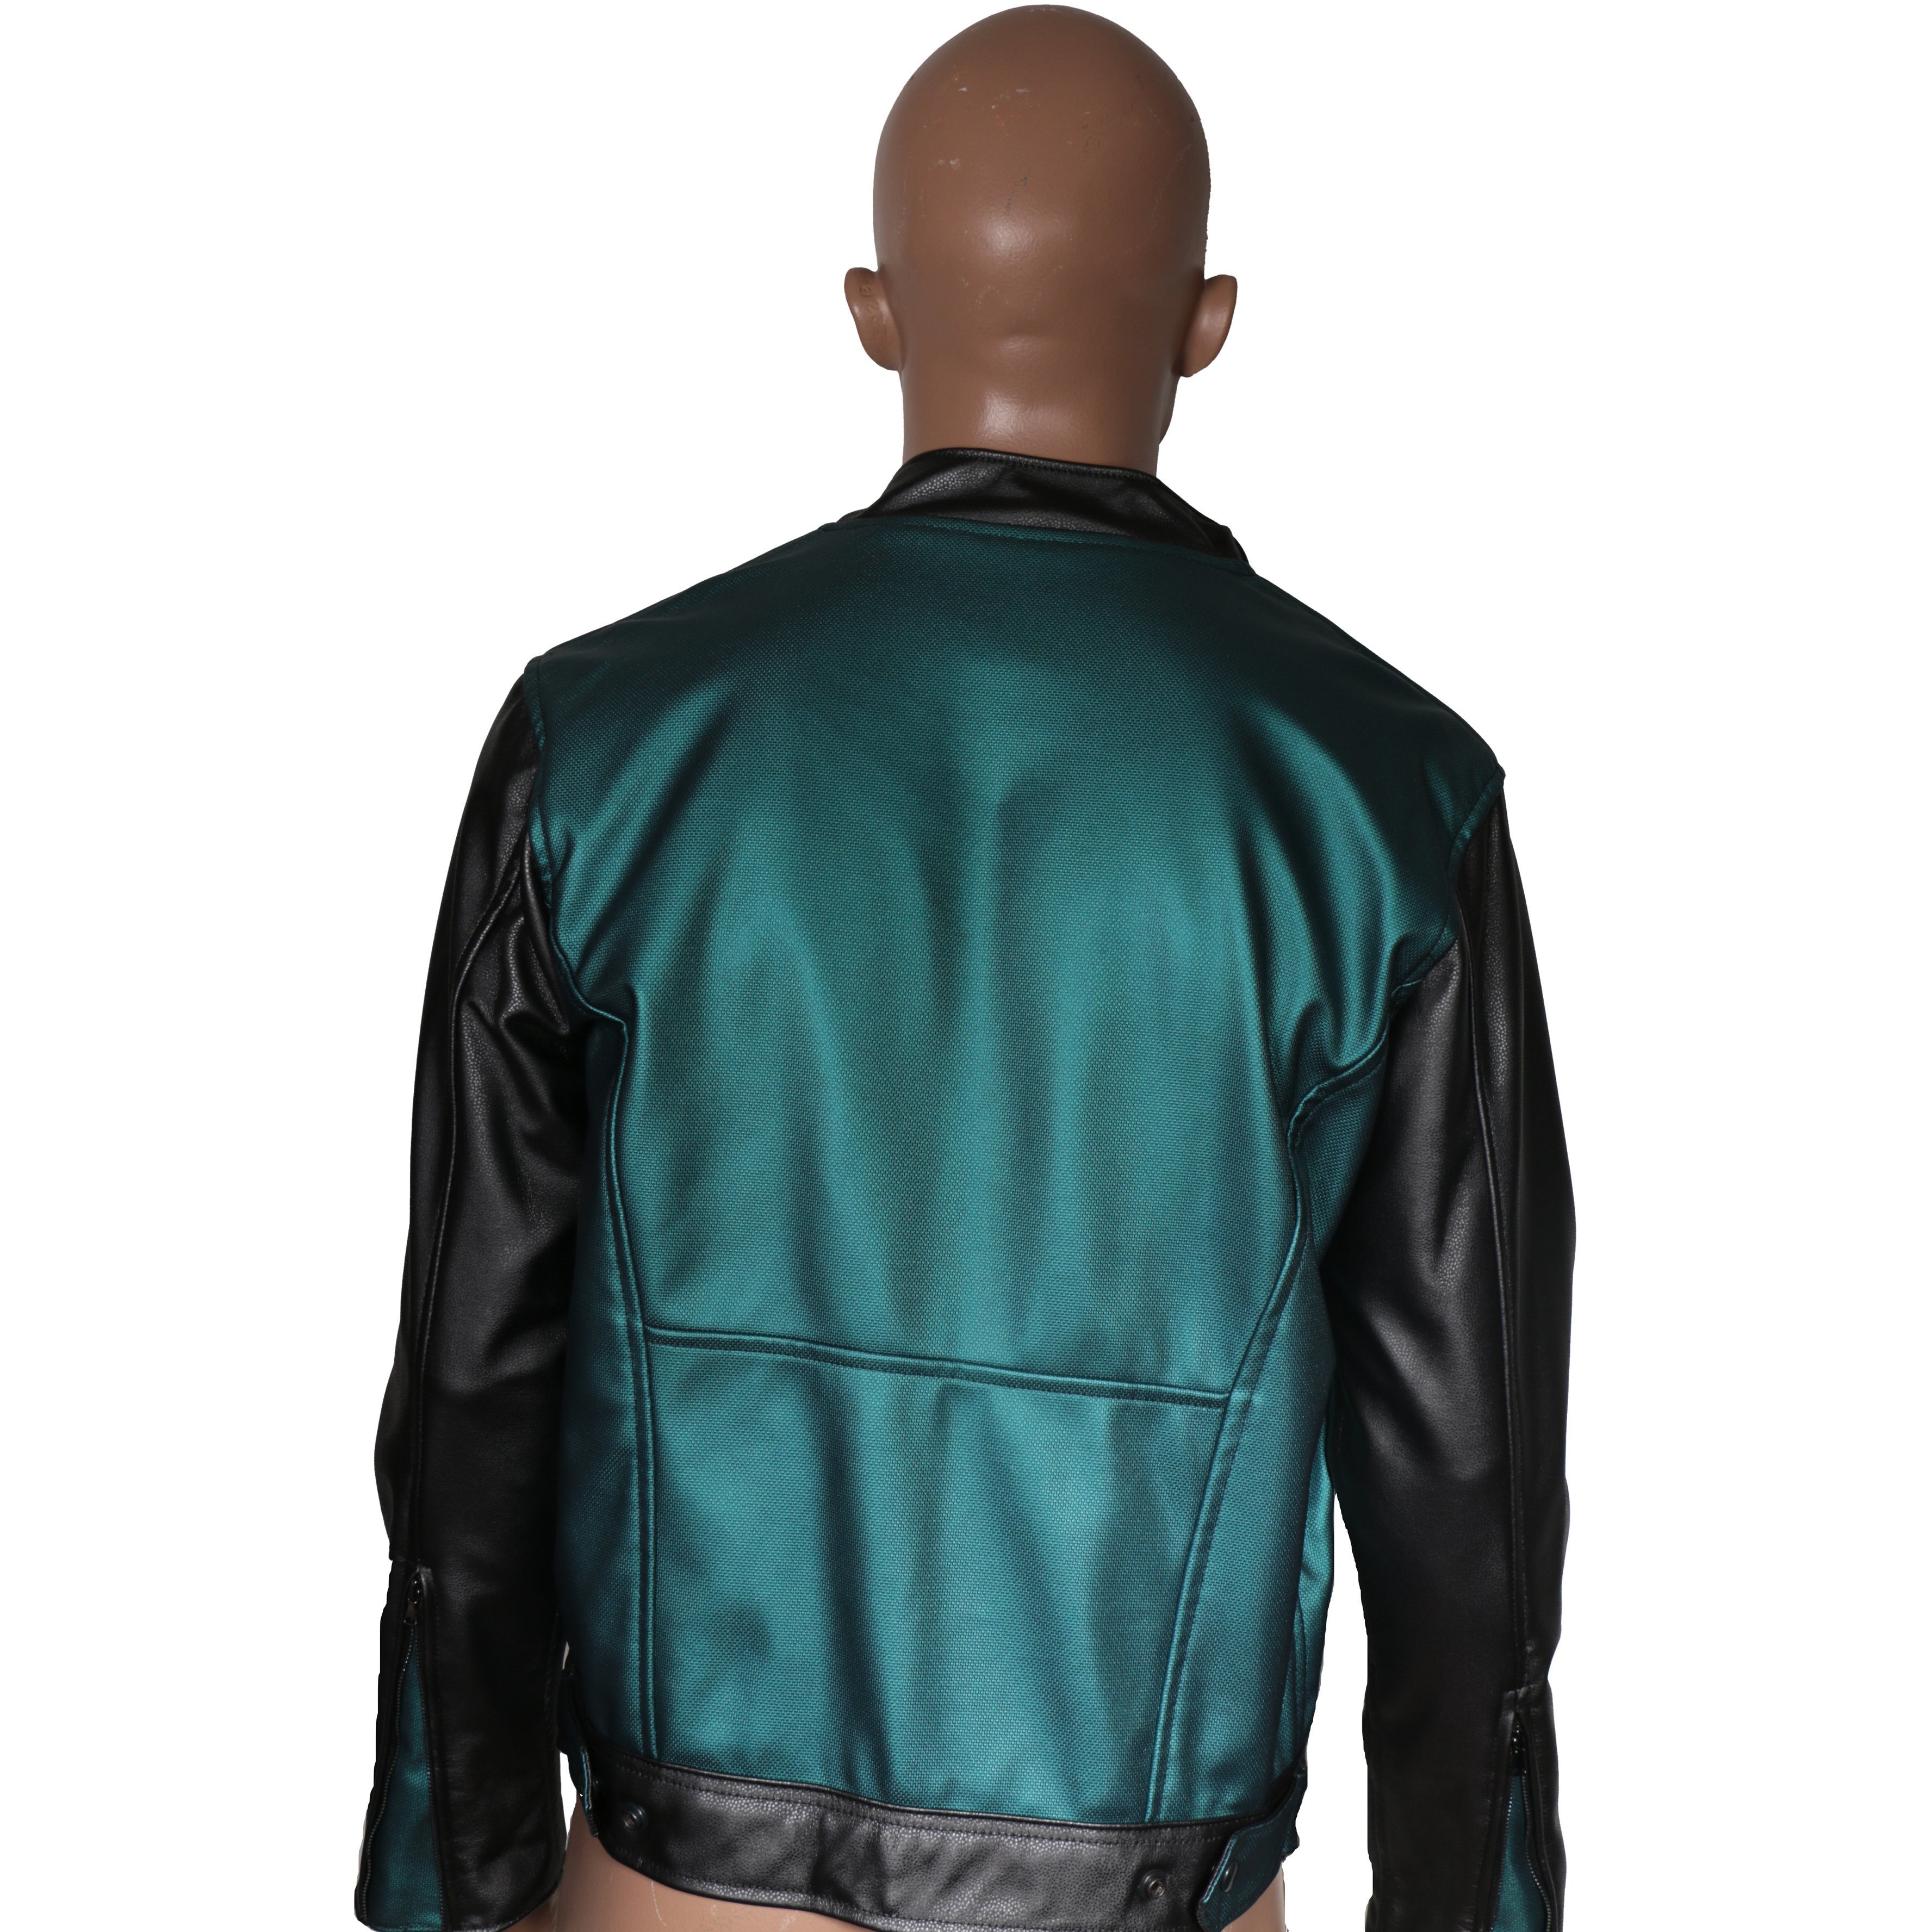 Green and black Synthetic leather Jacket